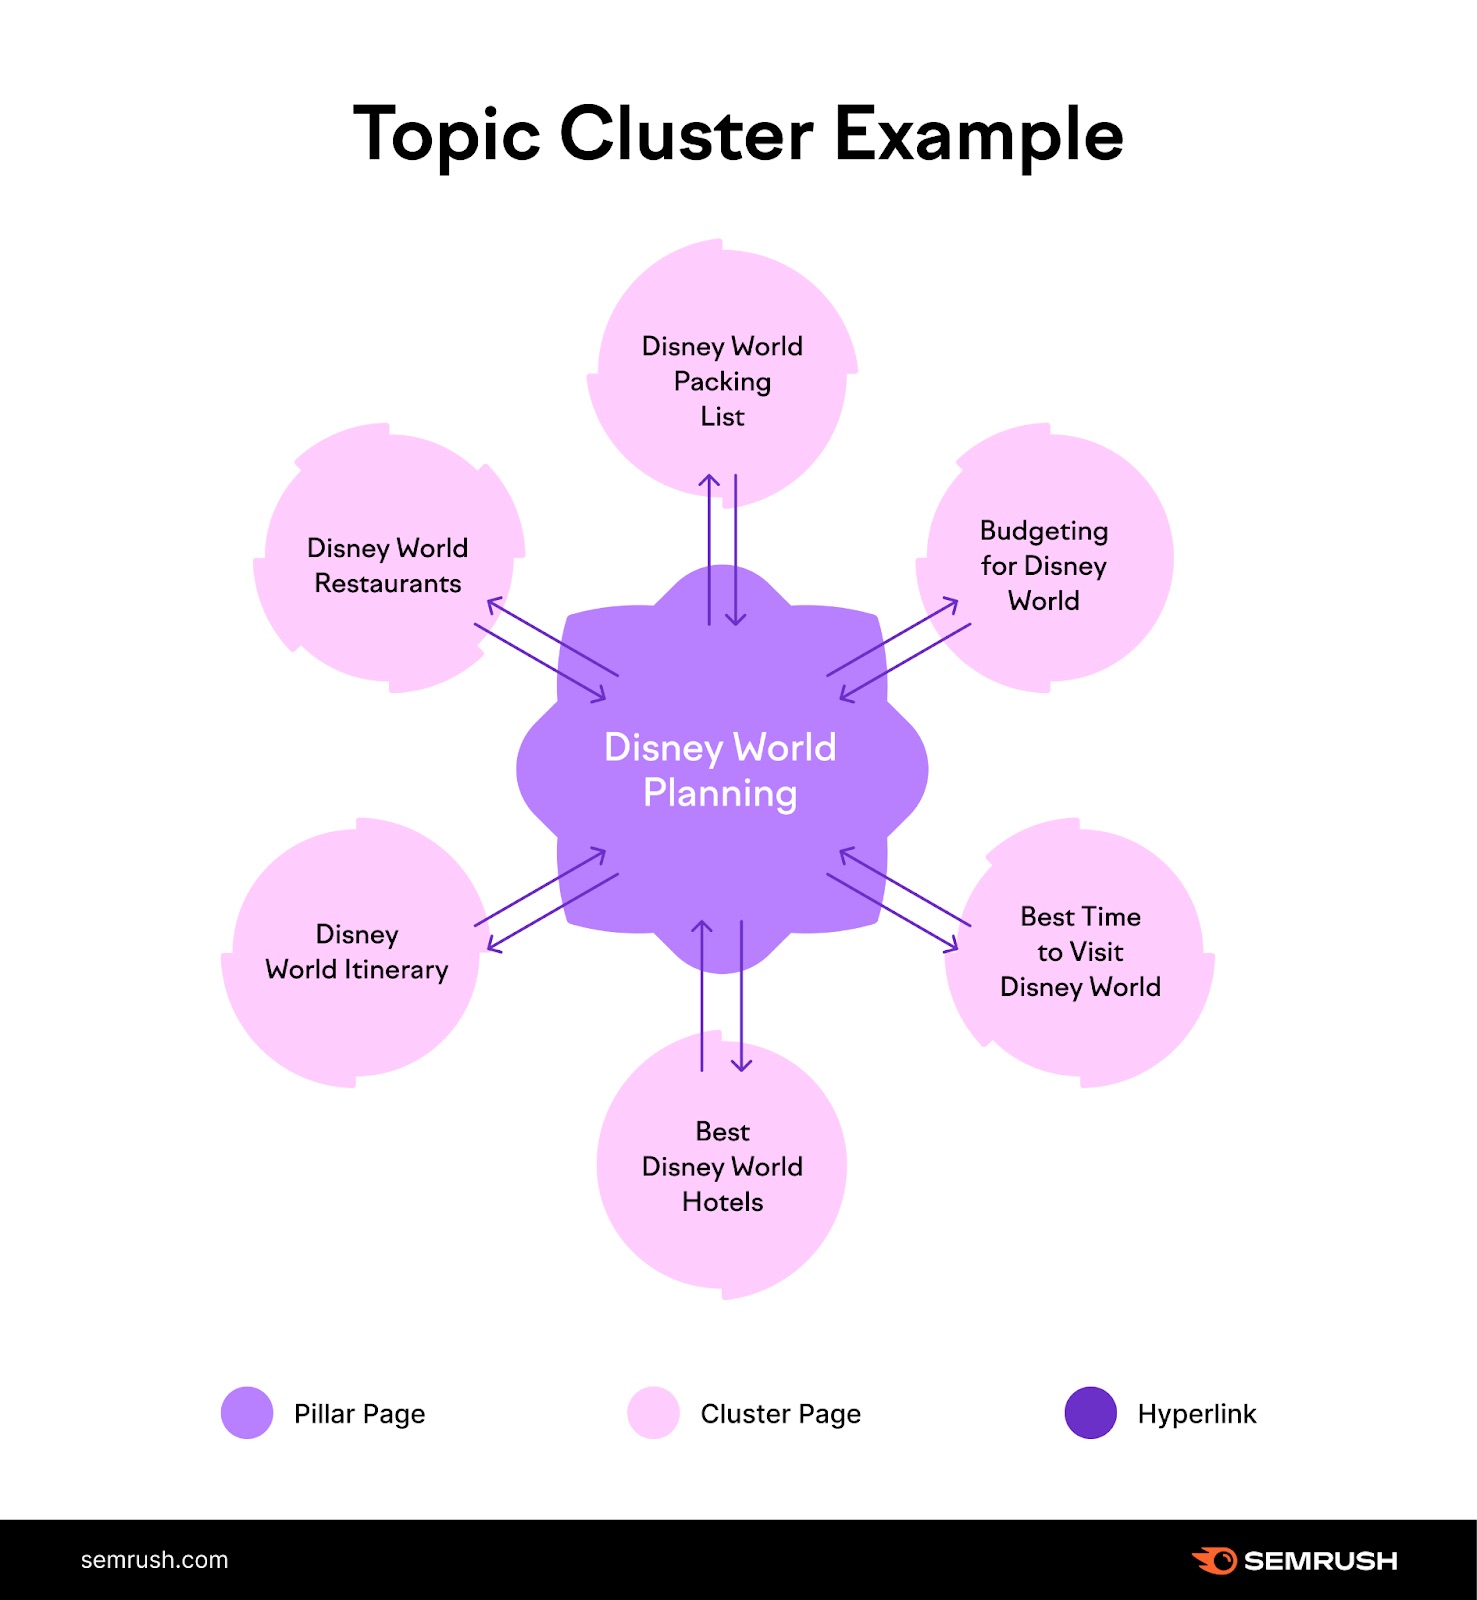 An example of a topic cluster for "Disney World" Planning